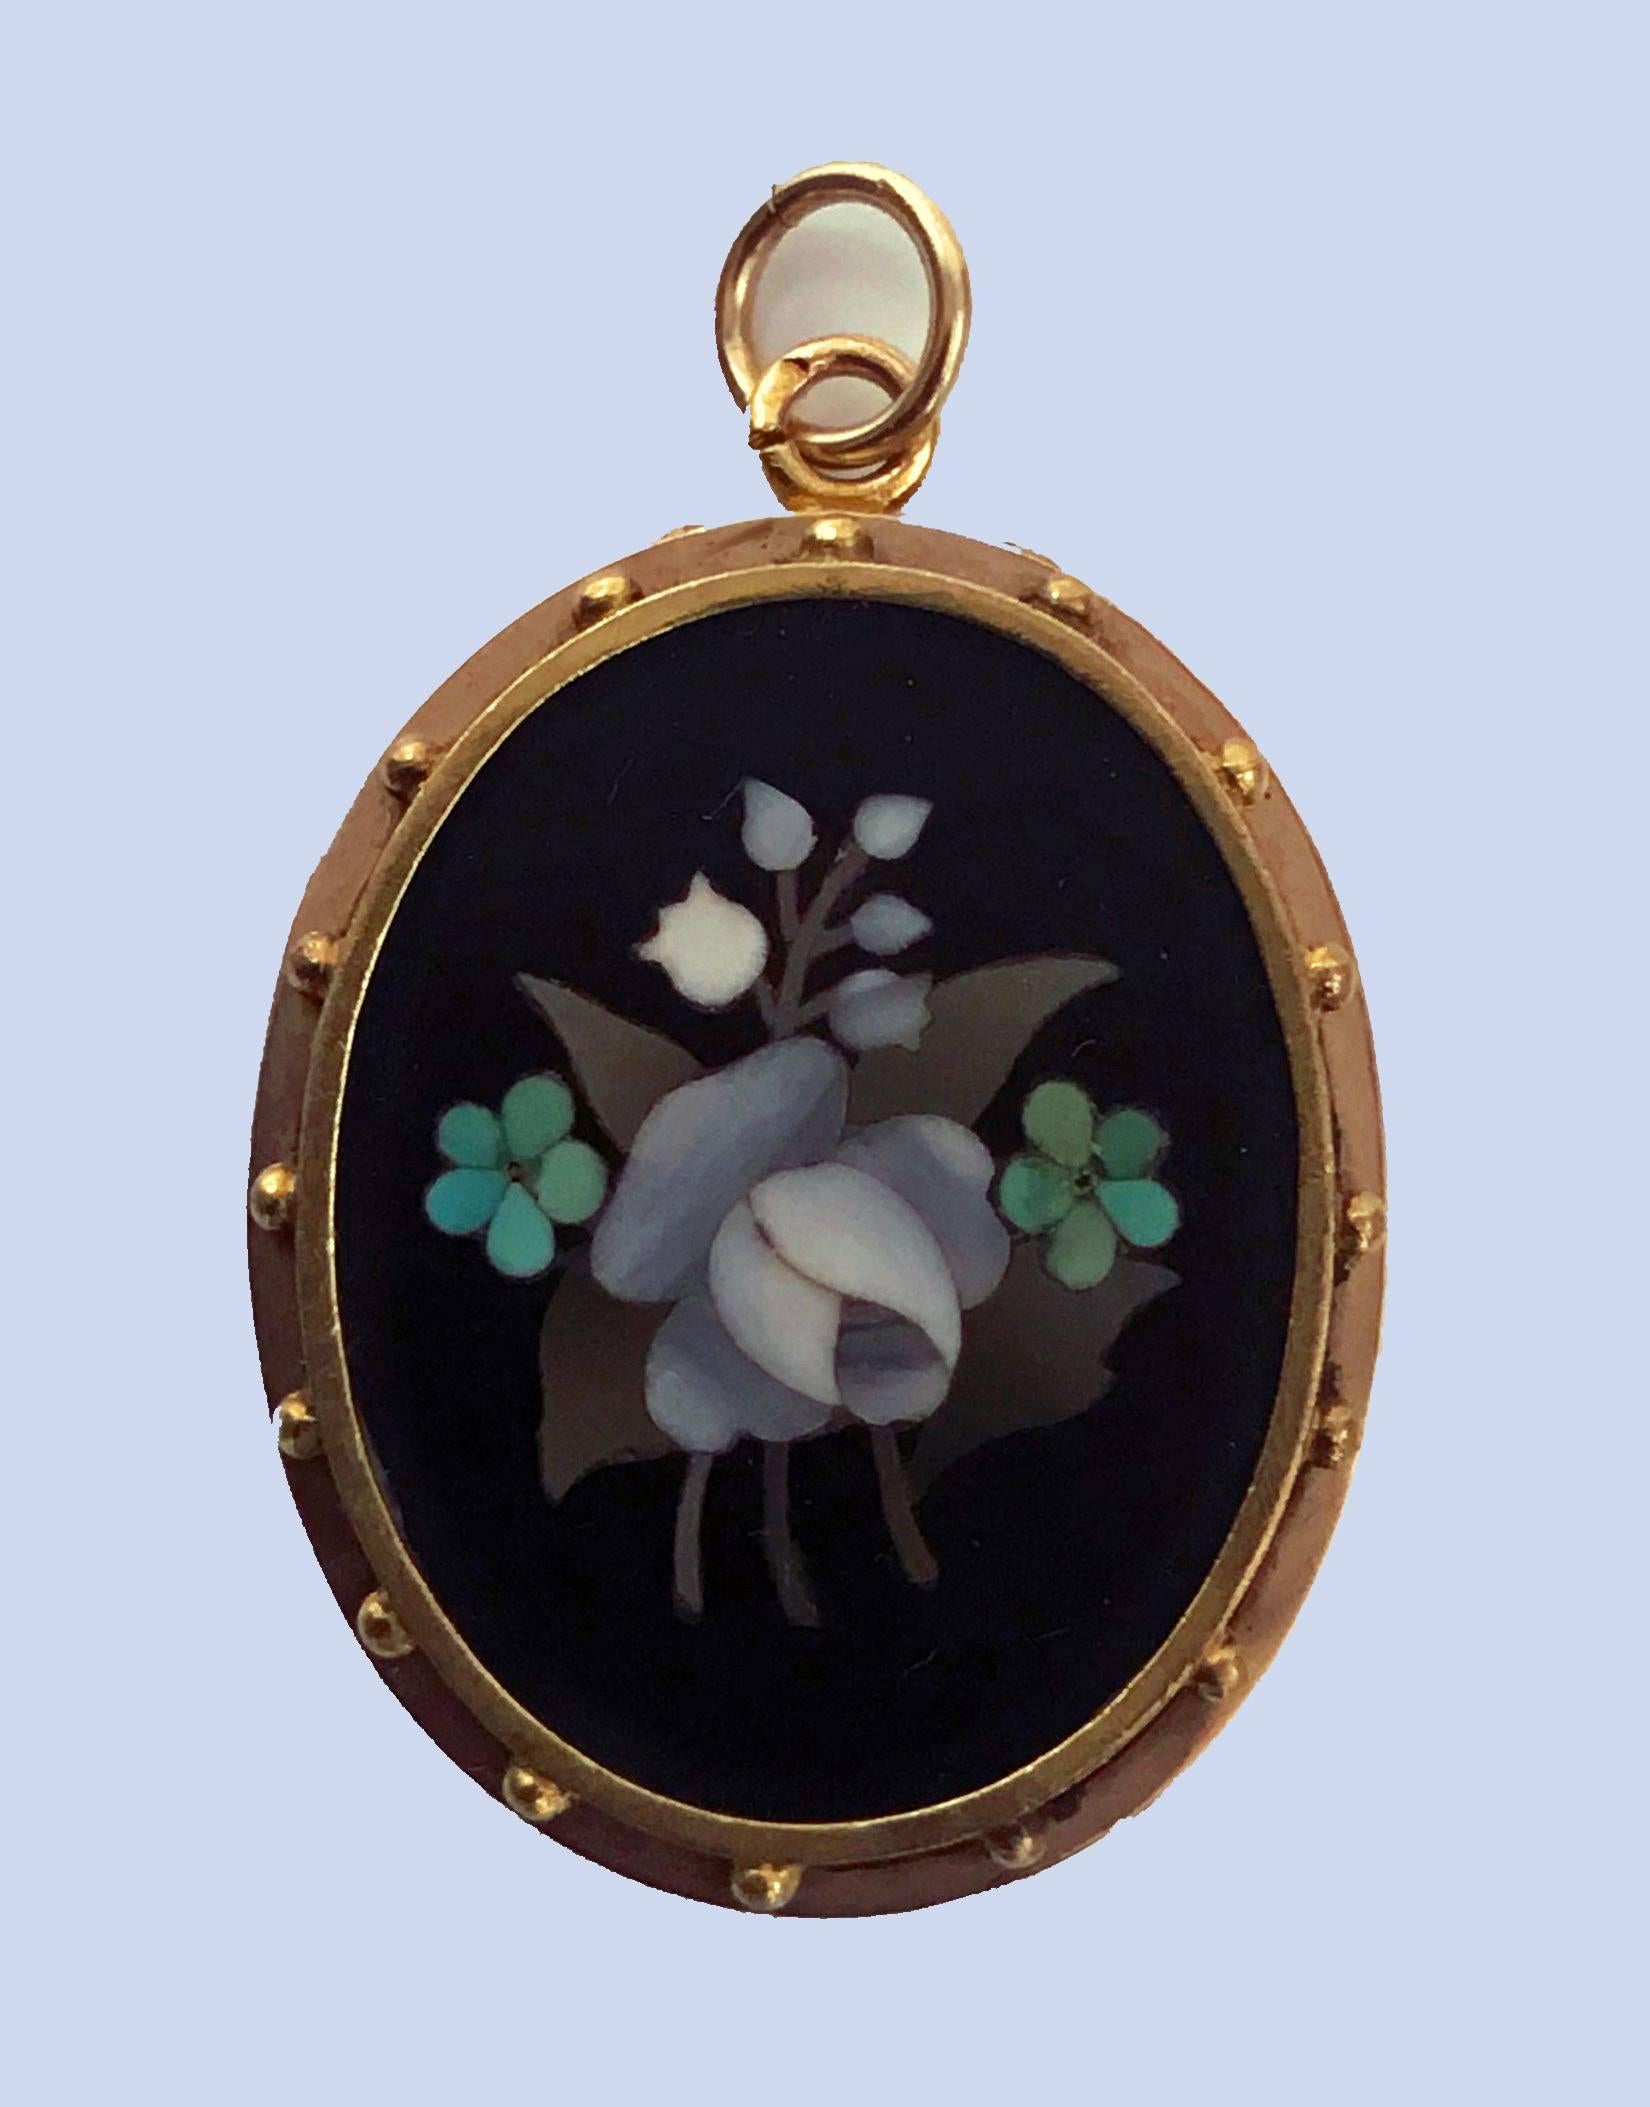 Antique 18K Gold Pietra Dura Pendant Locket, Italy C.1875. The Pendant Locket of oval shape, fine pietra dura floral white, green, lilac inlay colors, the surround gold mount of bead work. The reverse with hinged vacant locket. Gold acid tests 18K.